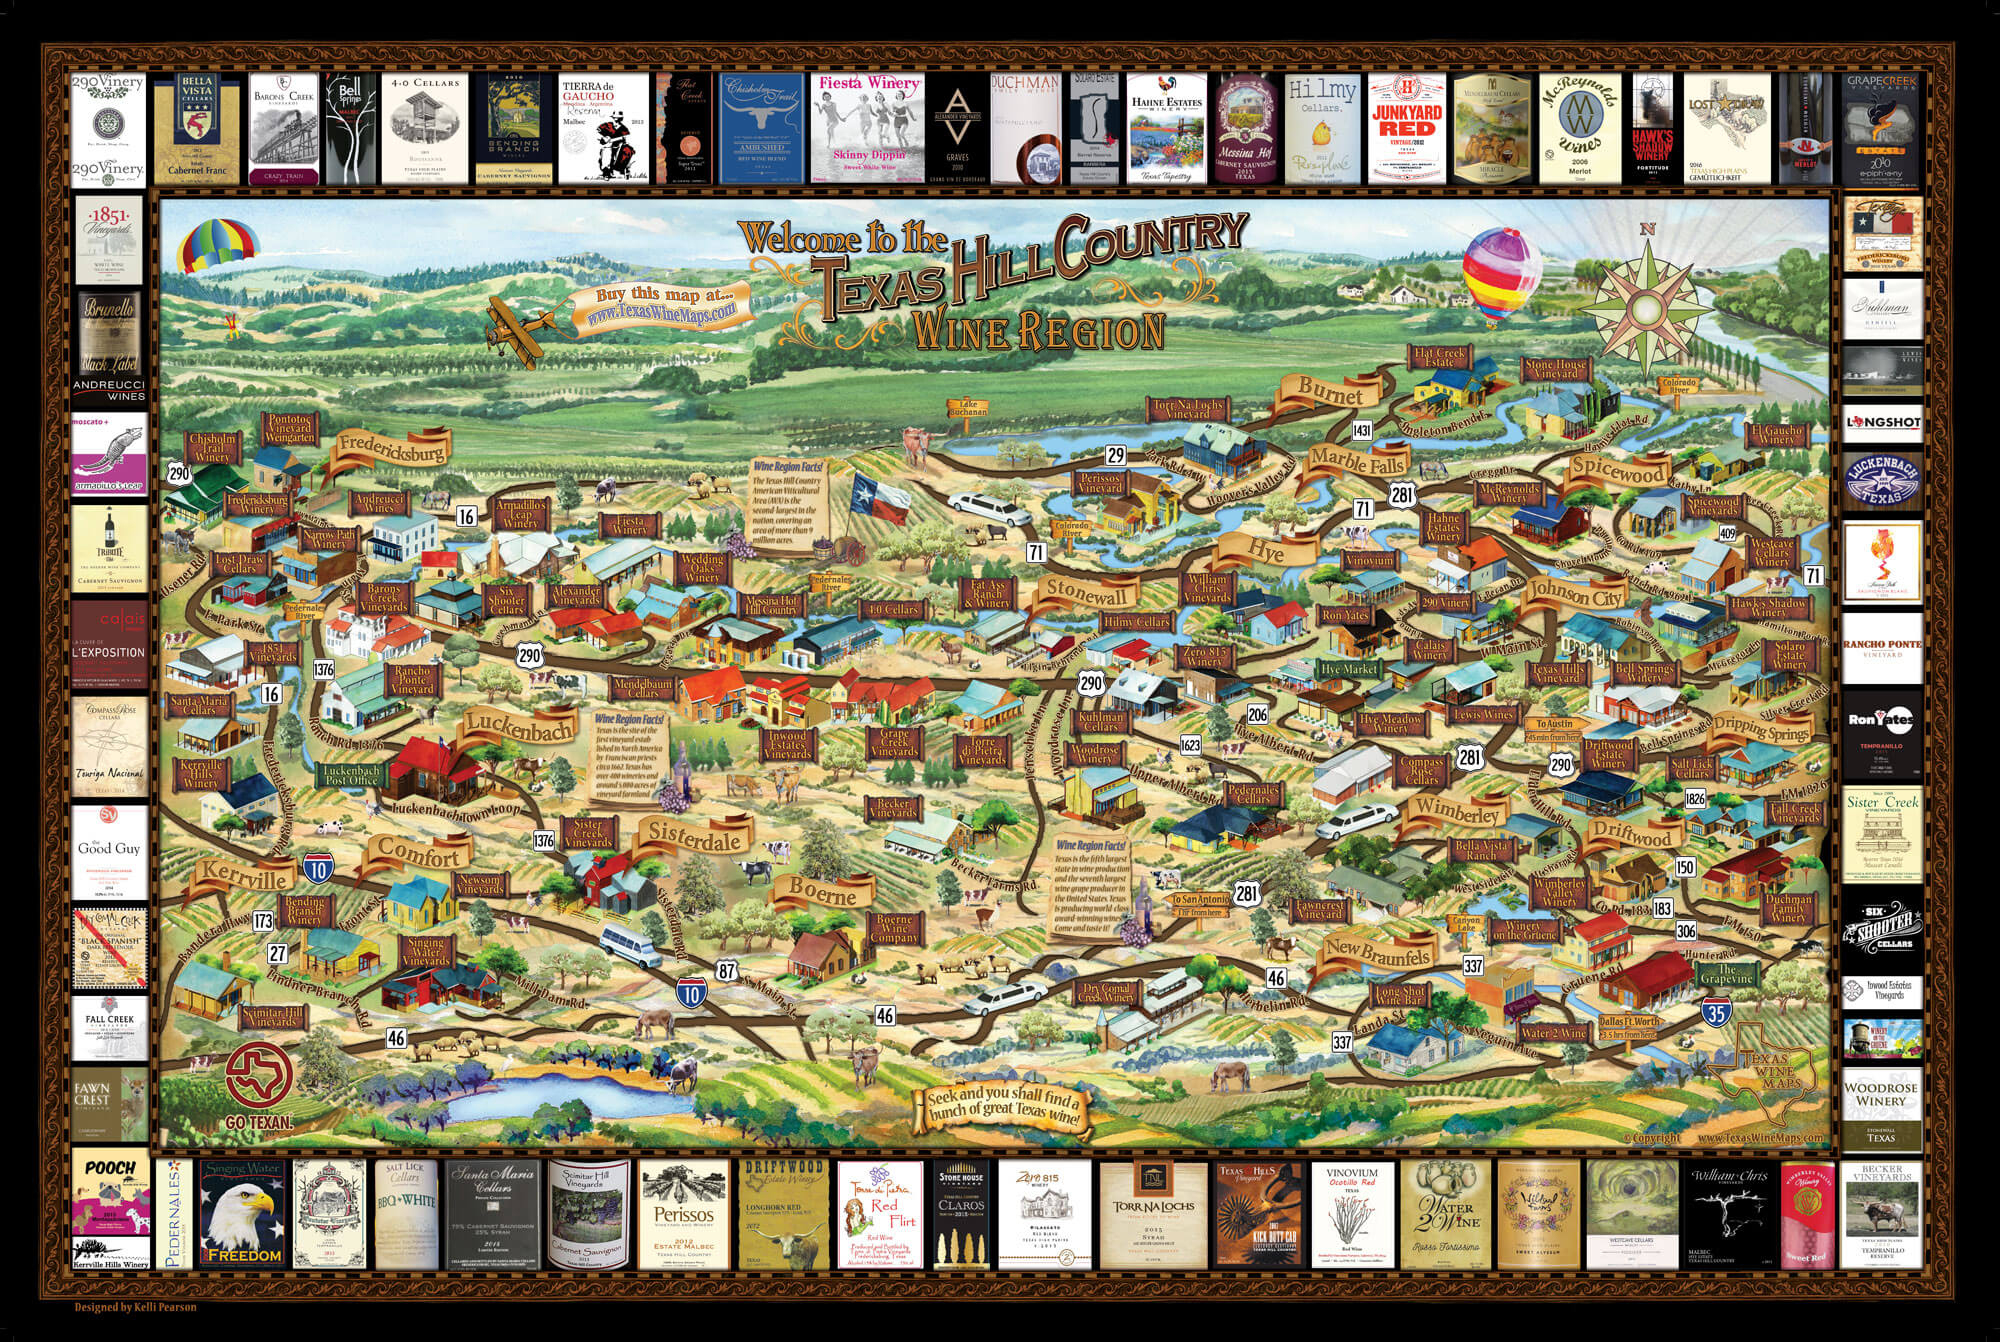 Laminated Texas Wine Map Texas Wineries Map Texas Hill Country Fredericksburg Texas Winery Map 